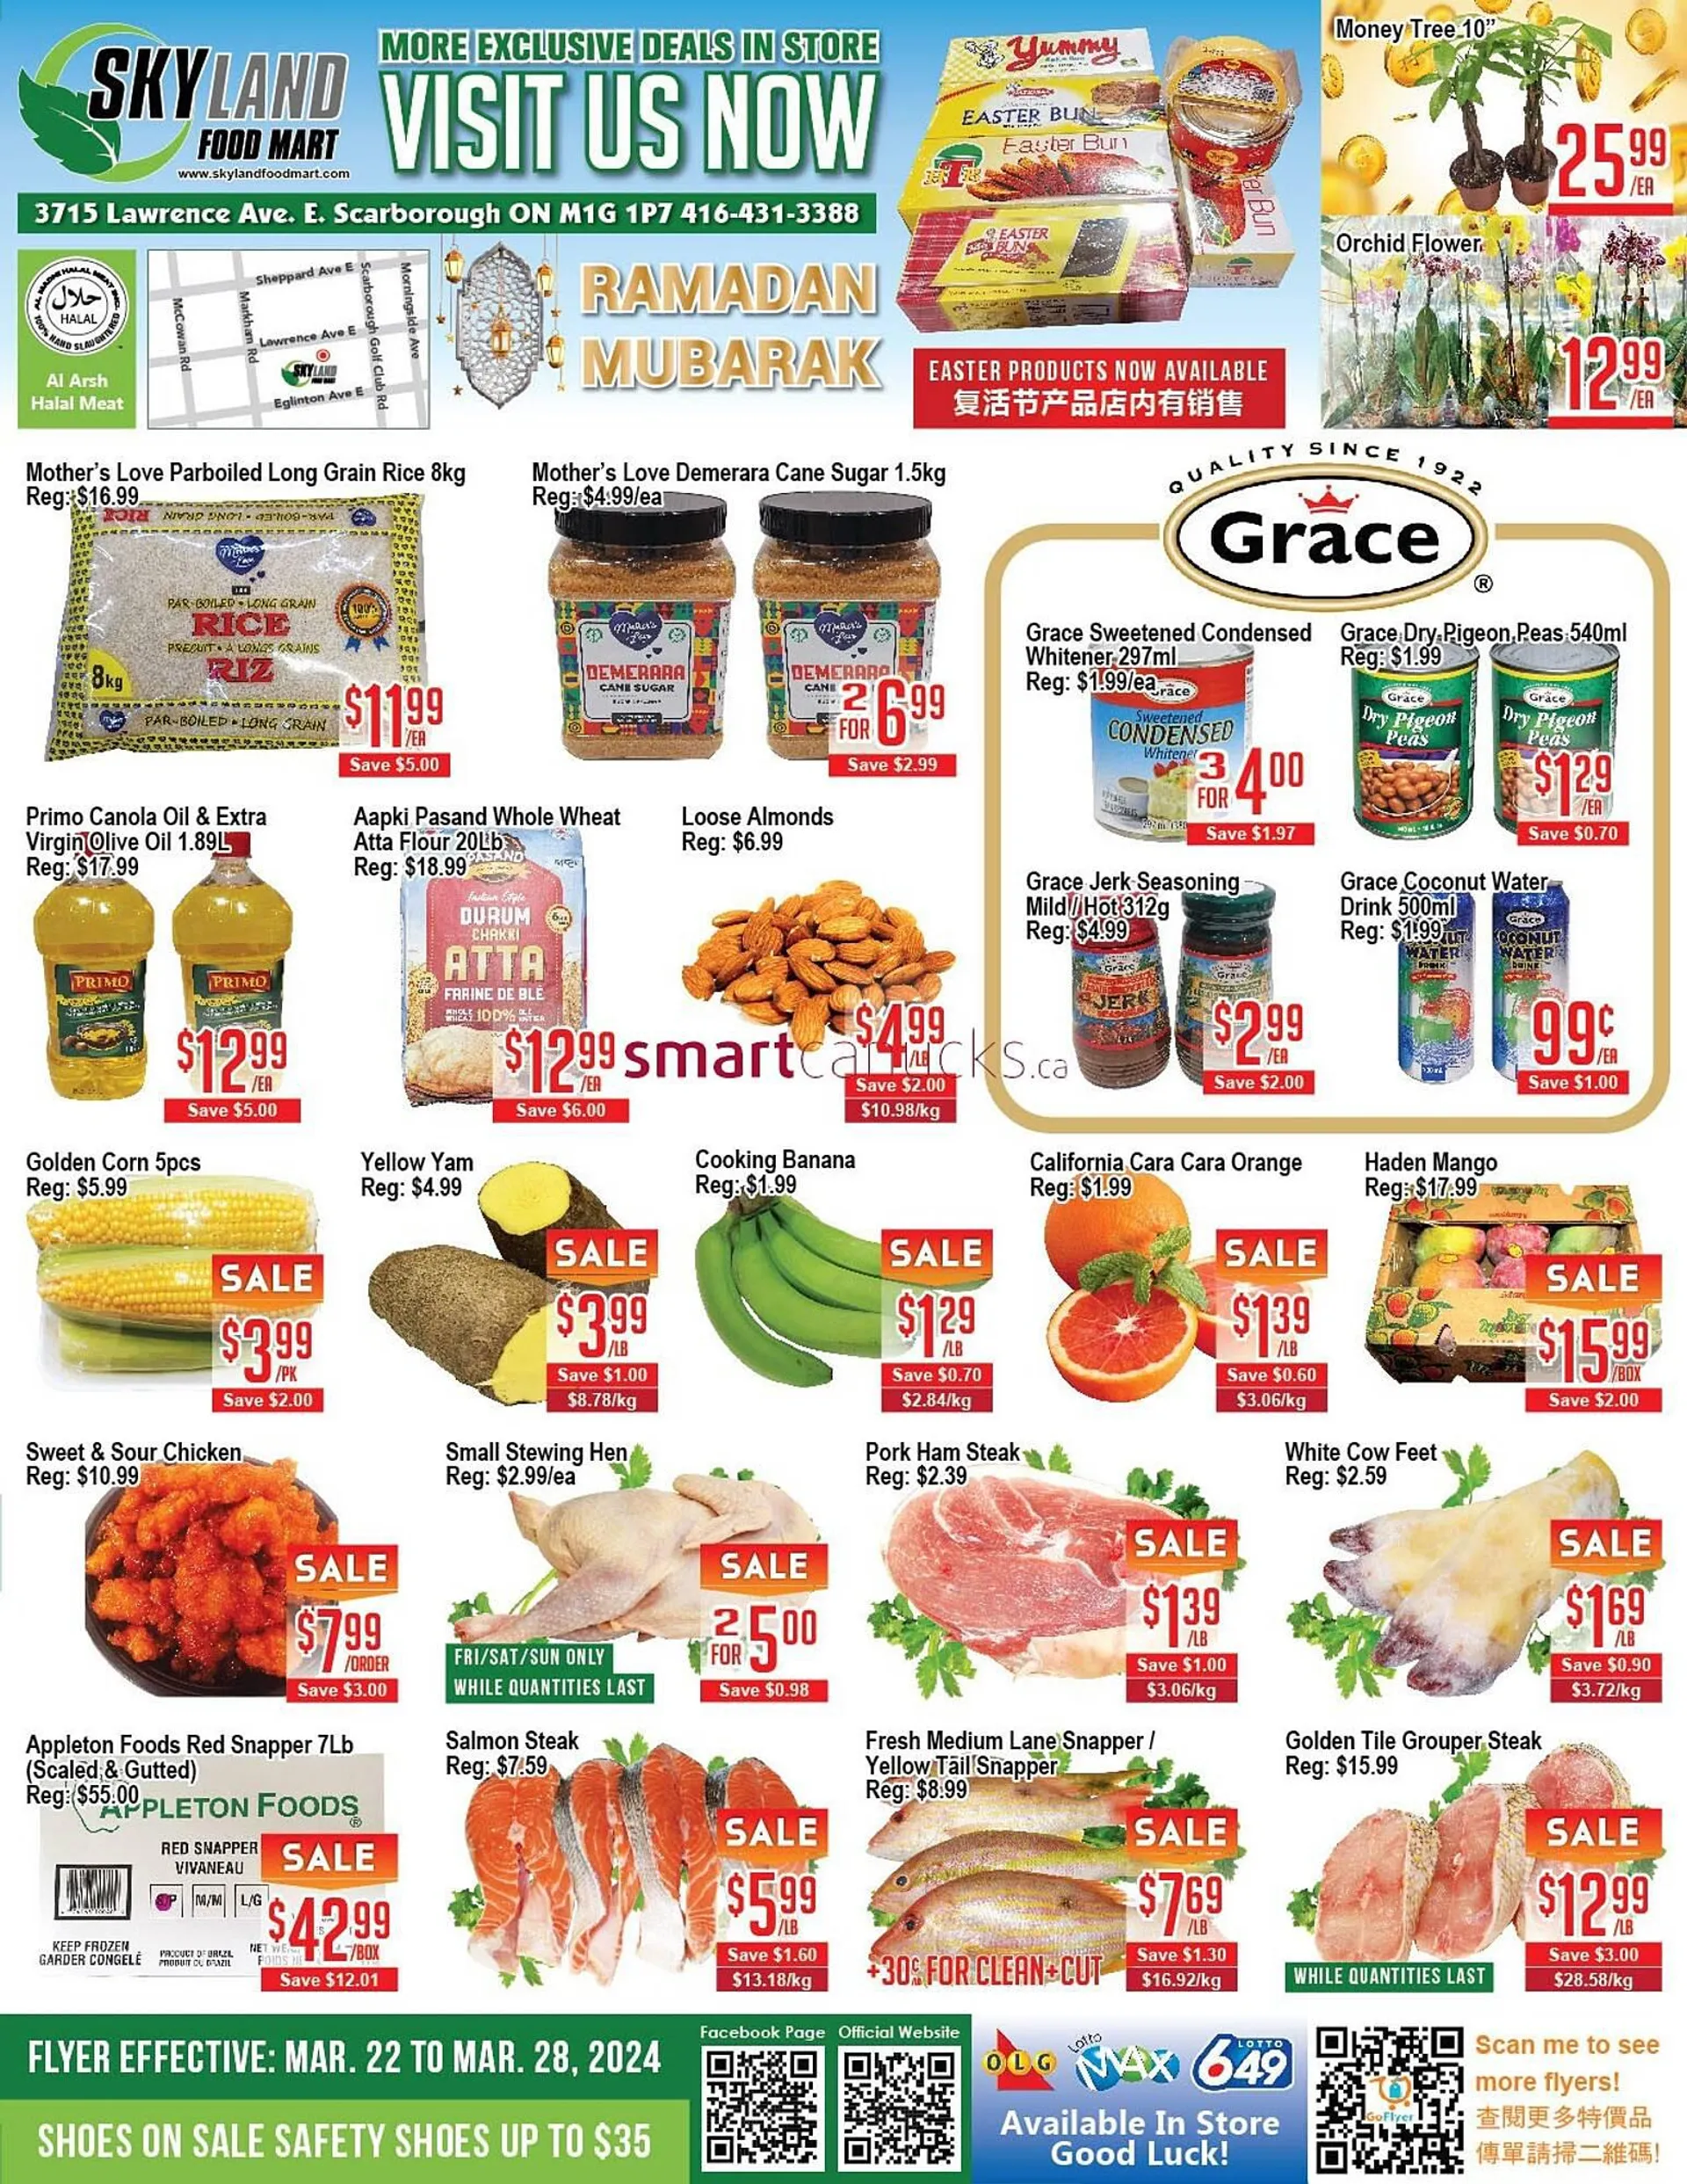 Skyland Foodmart flyer from March 22 to March 28 2024 - flyer page 